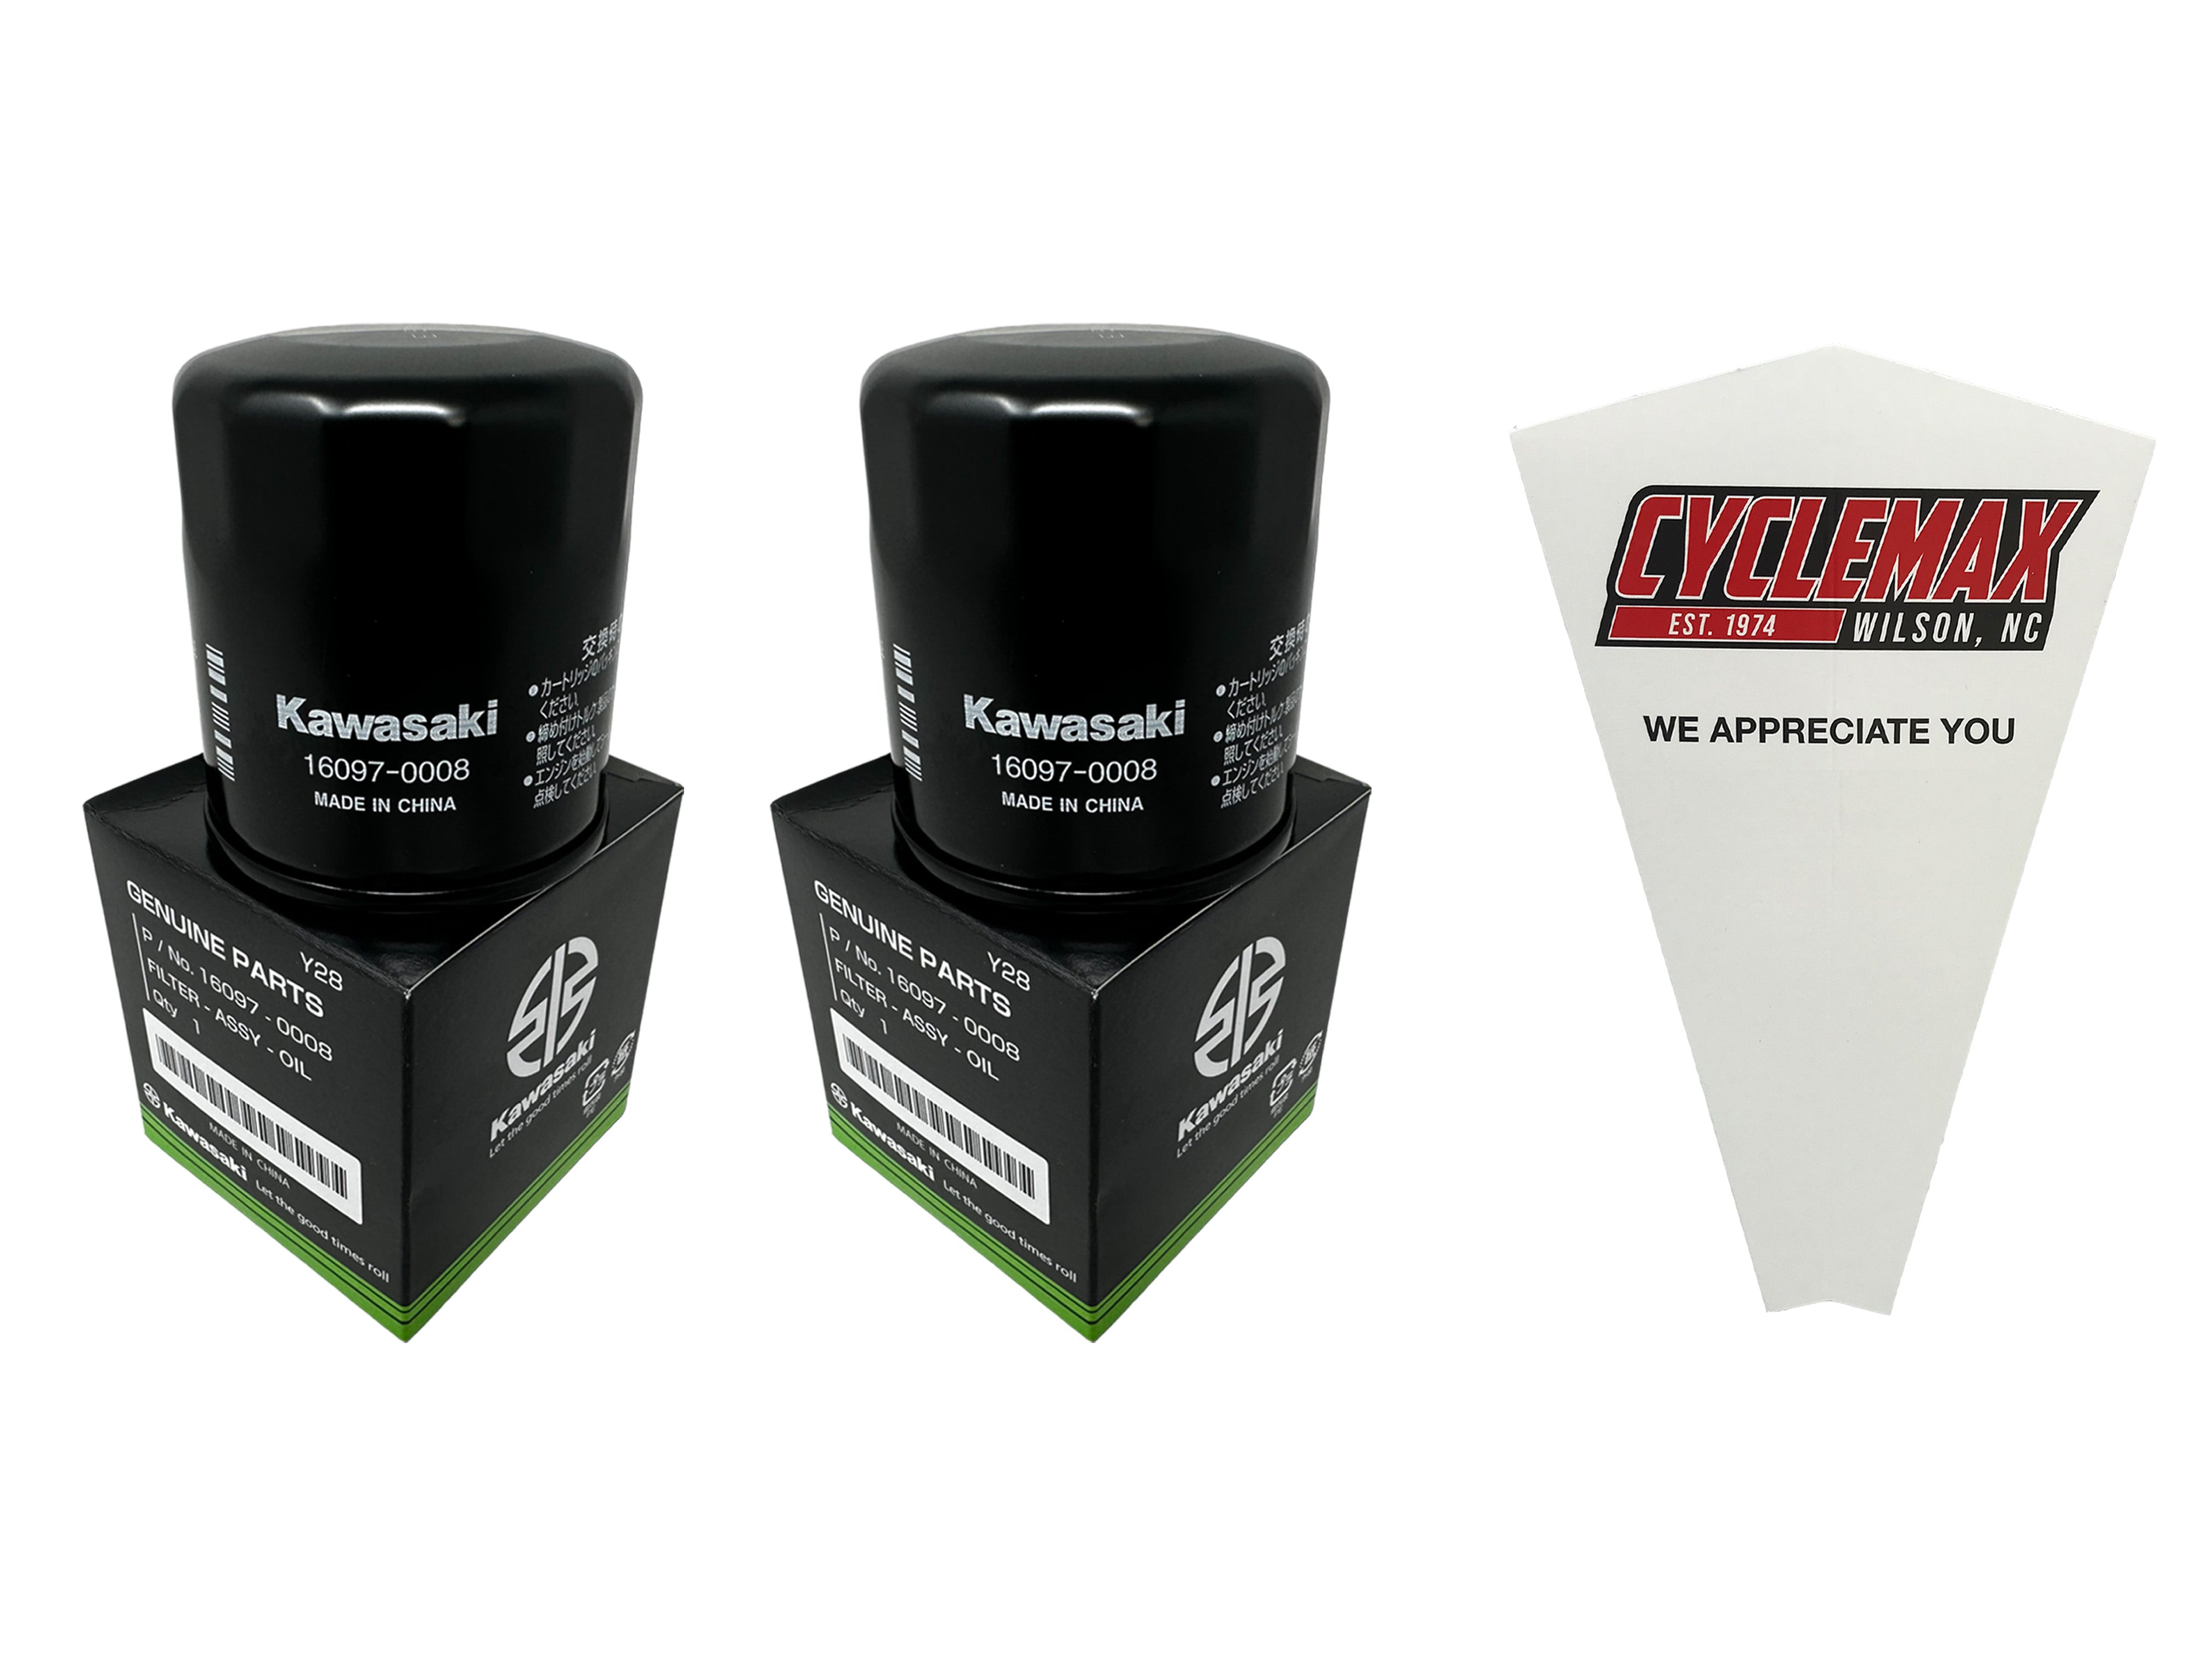 Cyclemax Two Pack for Kawasaki Oil Filter 16097-0008 Contains Two Filters and a Funnel